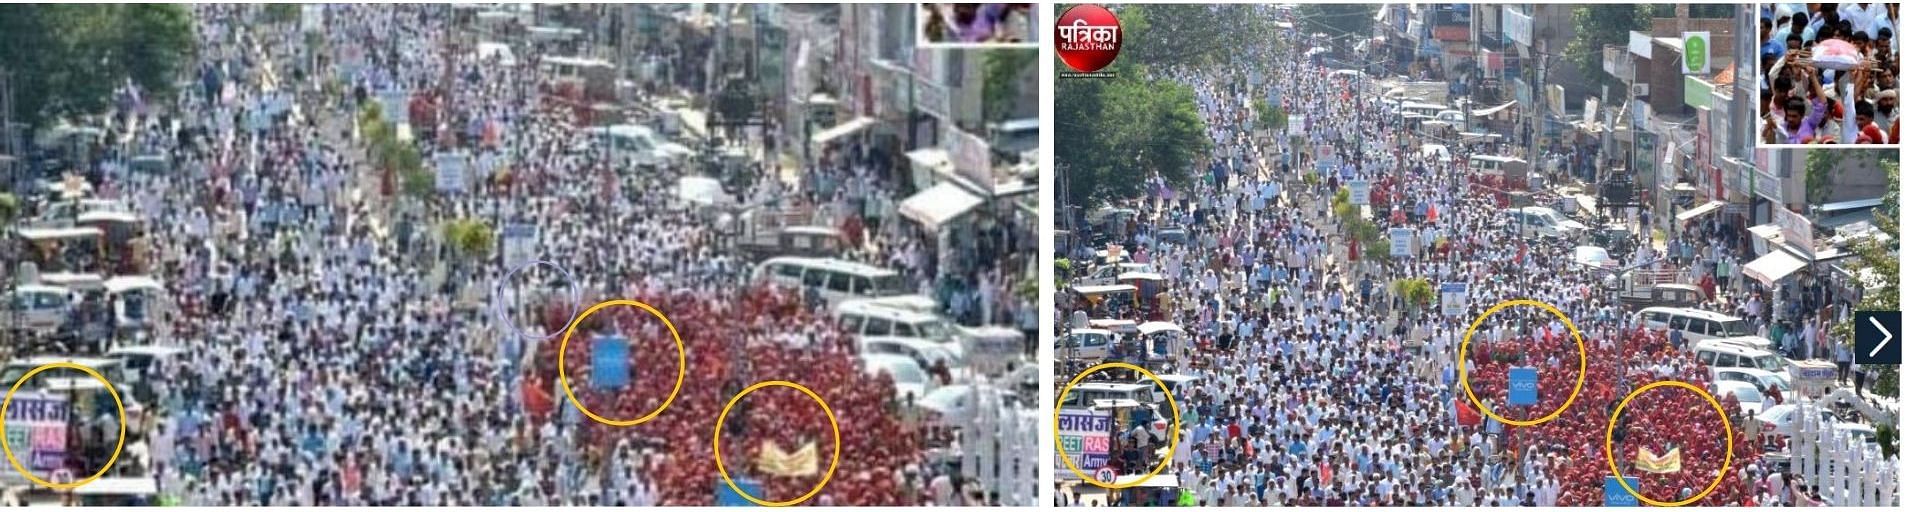 (A comparison between the viral image and the image shared by Rajasthan Patrika)